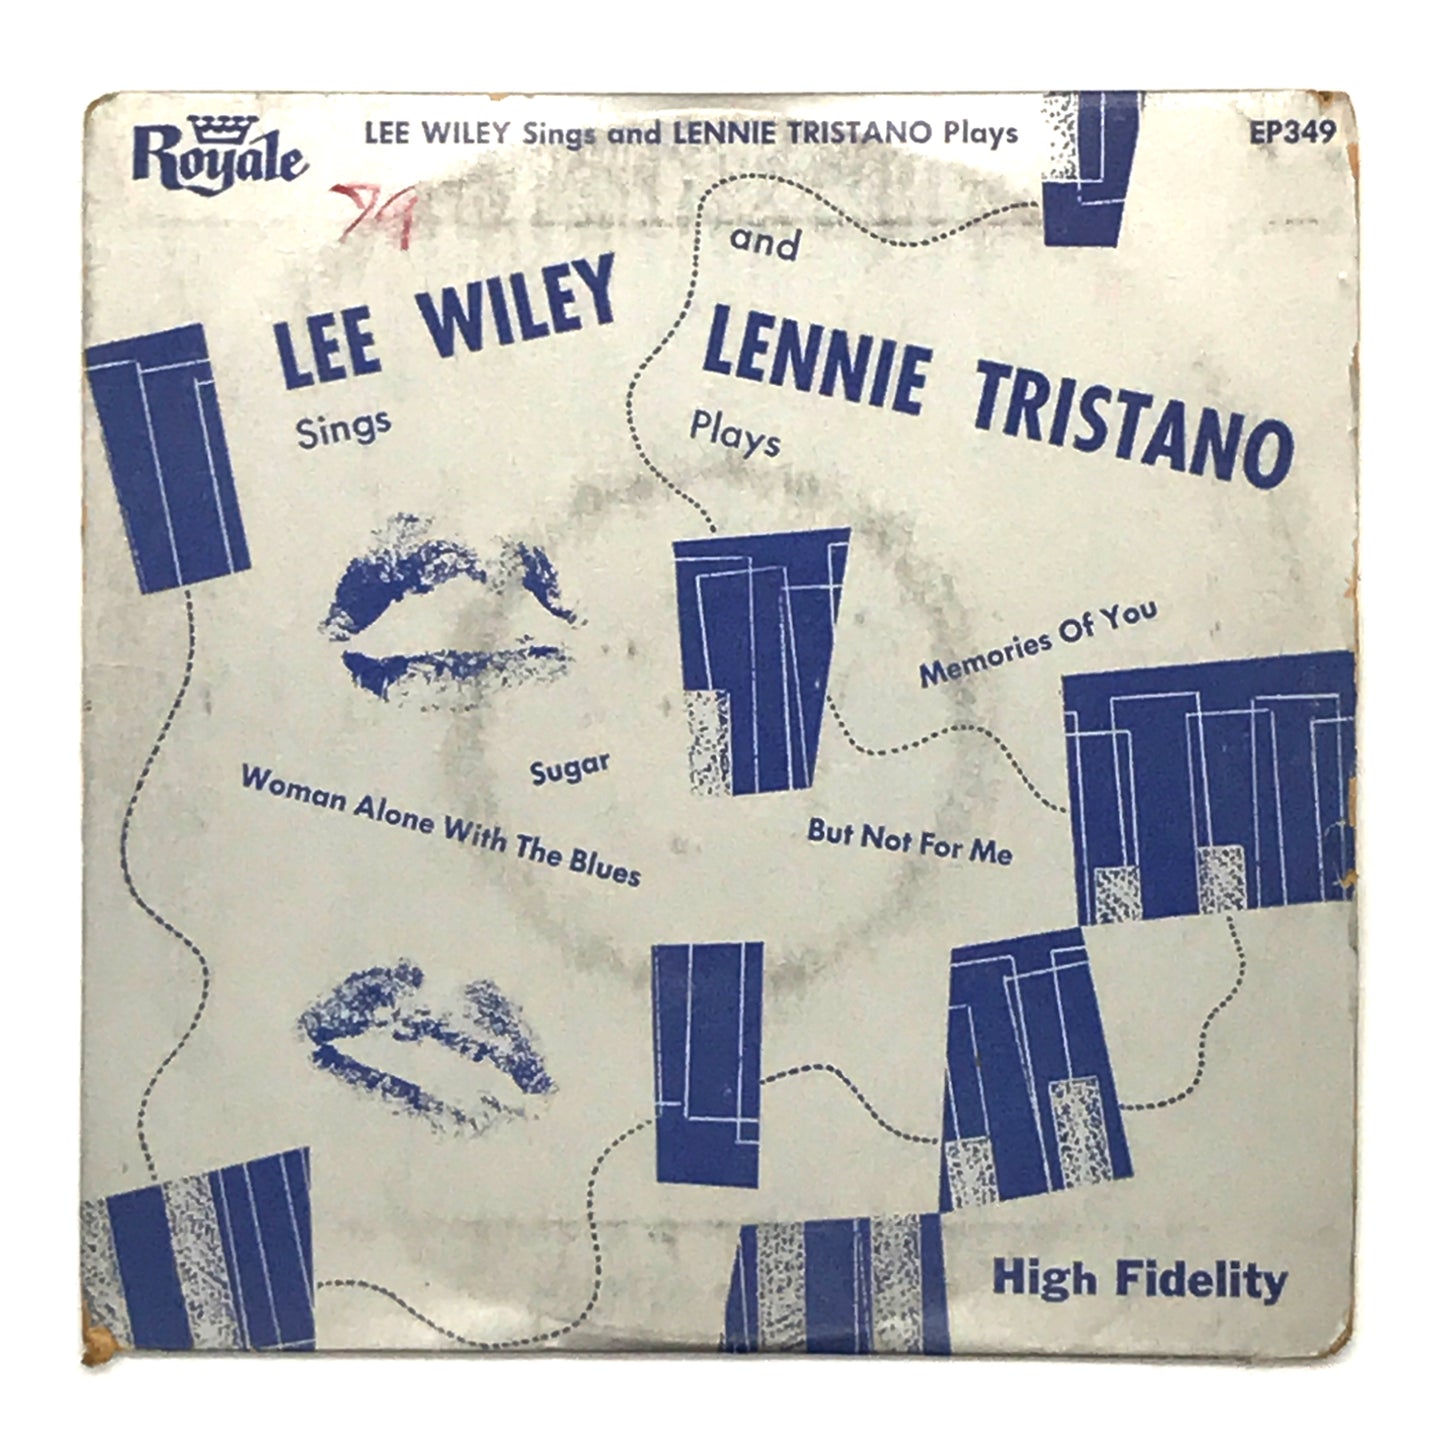 Lee Wiley + Lenny Tristano : LEE WILEY SINGS AND LENNIE TRISTANO PLAYS